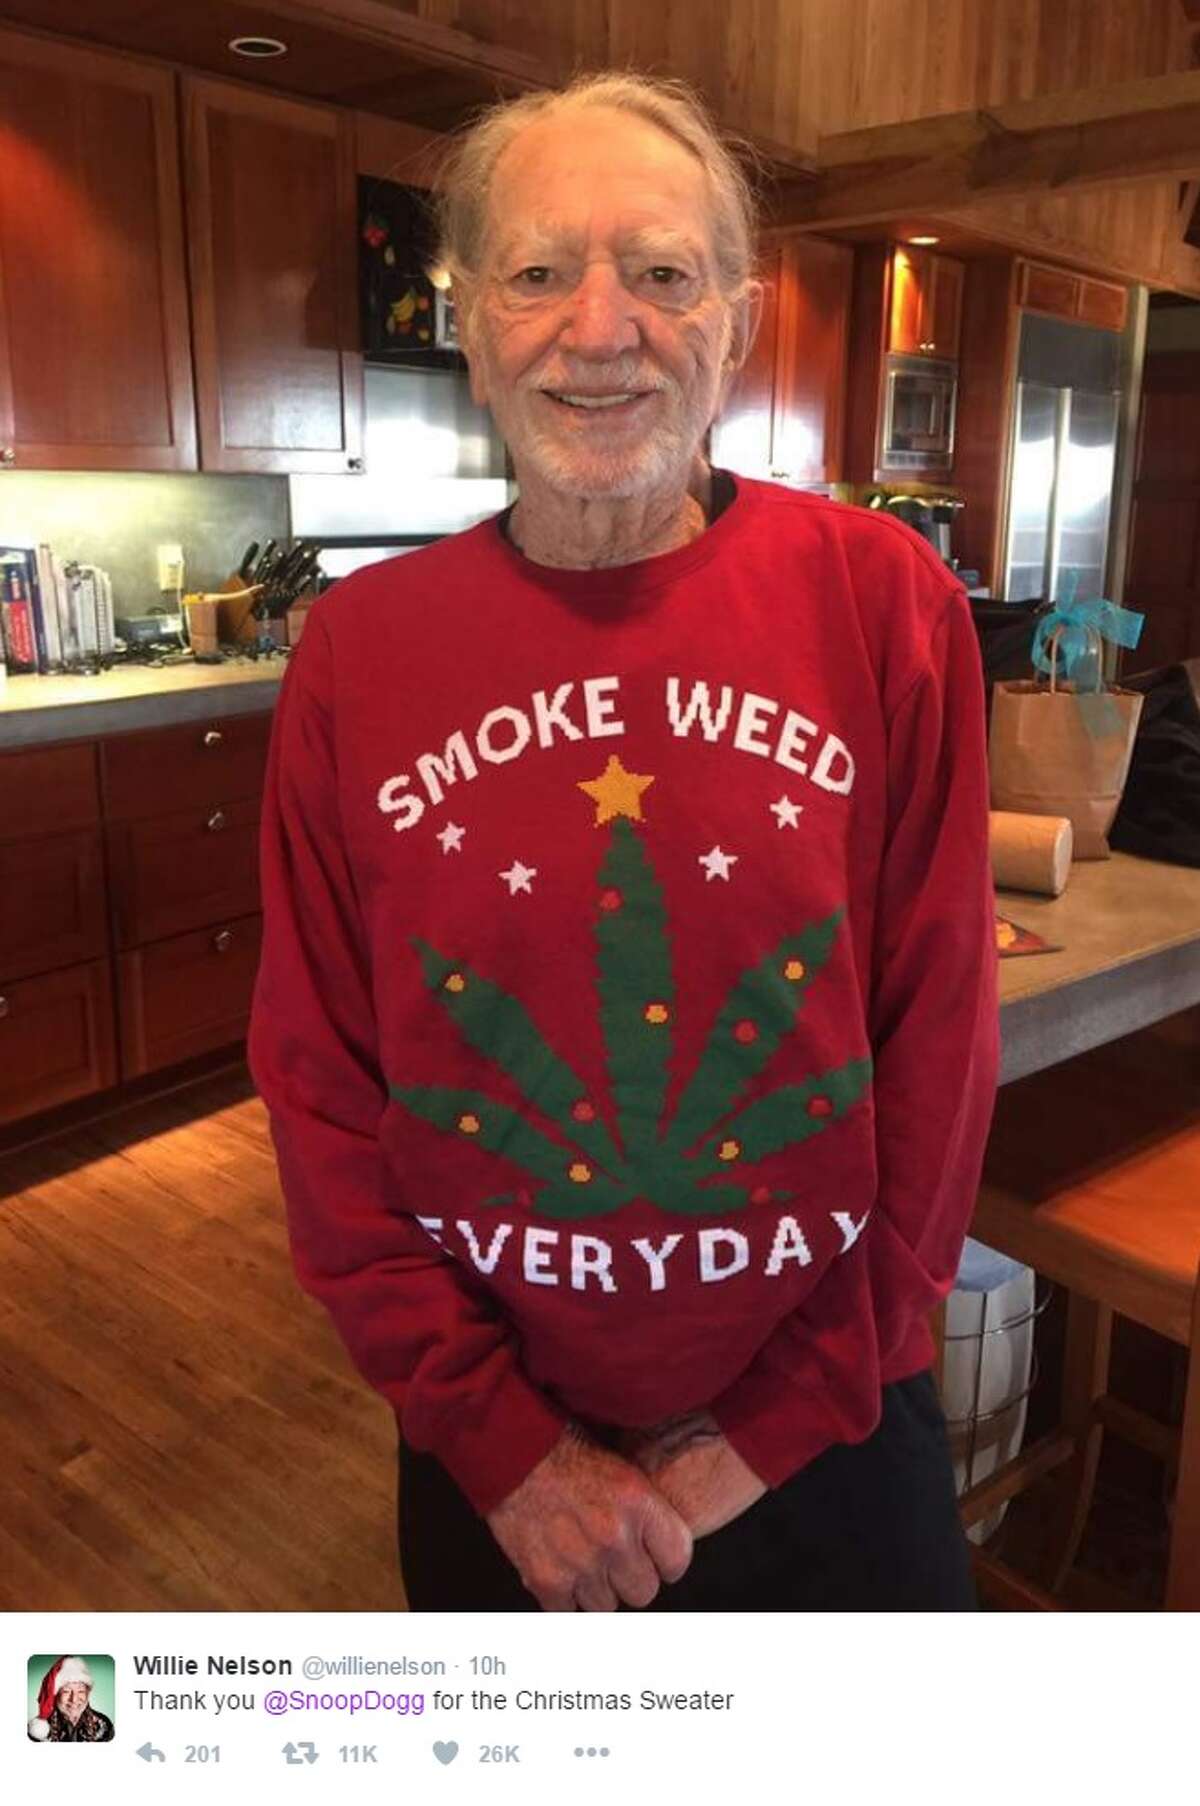 @willienelson: "Thank you @SnoopDogg for the Christmas Sweater"